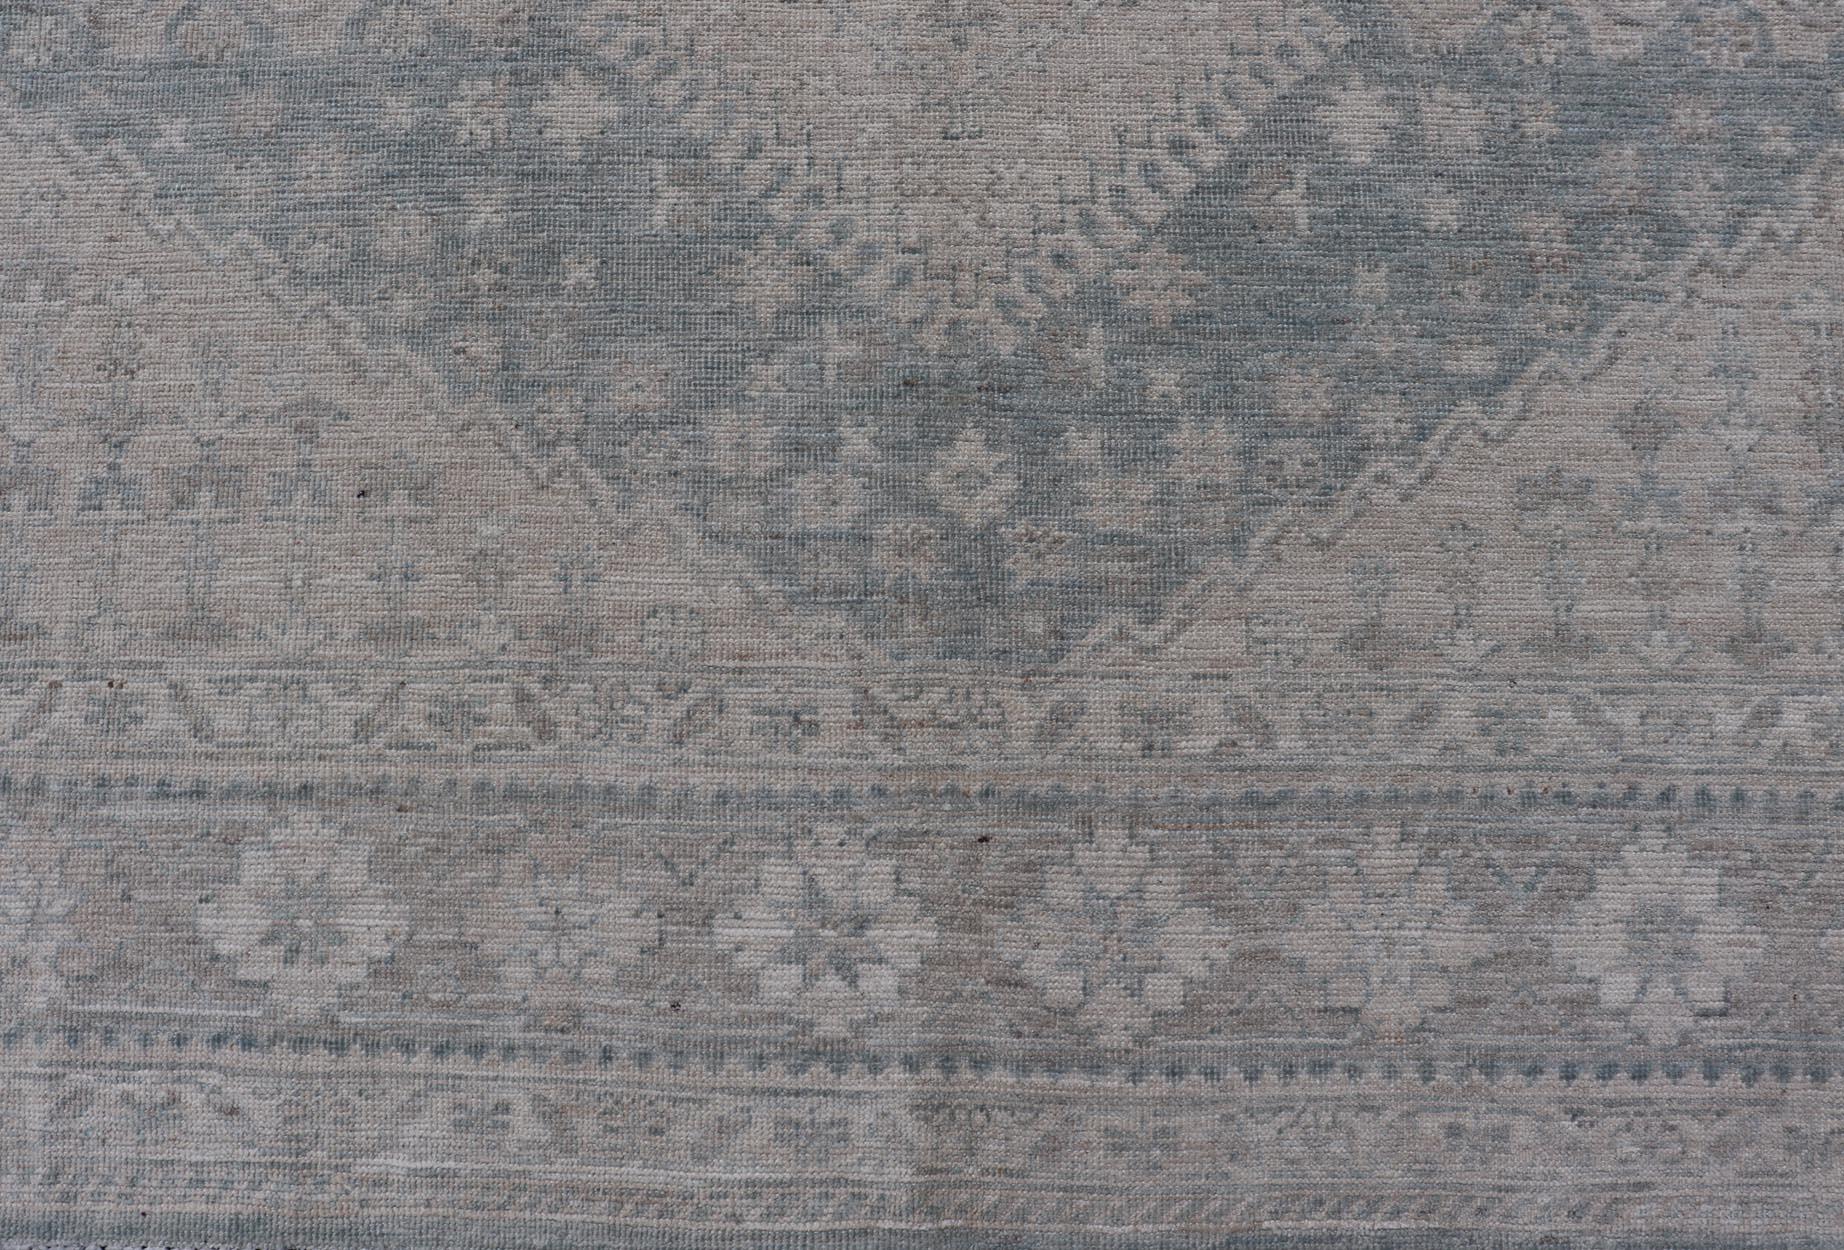 Modern Persian Shiraz Rug with Tribal Design in Light Blue Background and Taupe. Keivan Woven Arts/ rug AWR-8003 Country of Origin: Afghanistan Type: Shiraz Design: Floral, Medallion Abstract-Tribal 

Measures: 8' x 9'9

This Shiraz presents